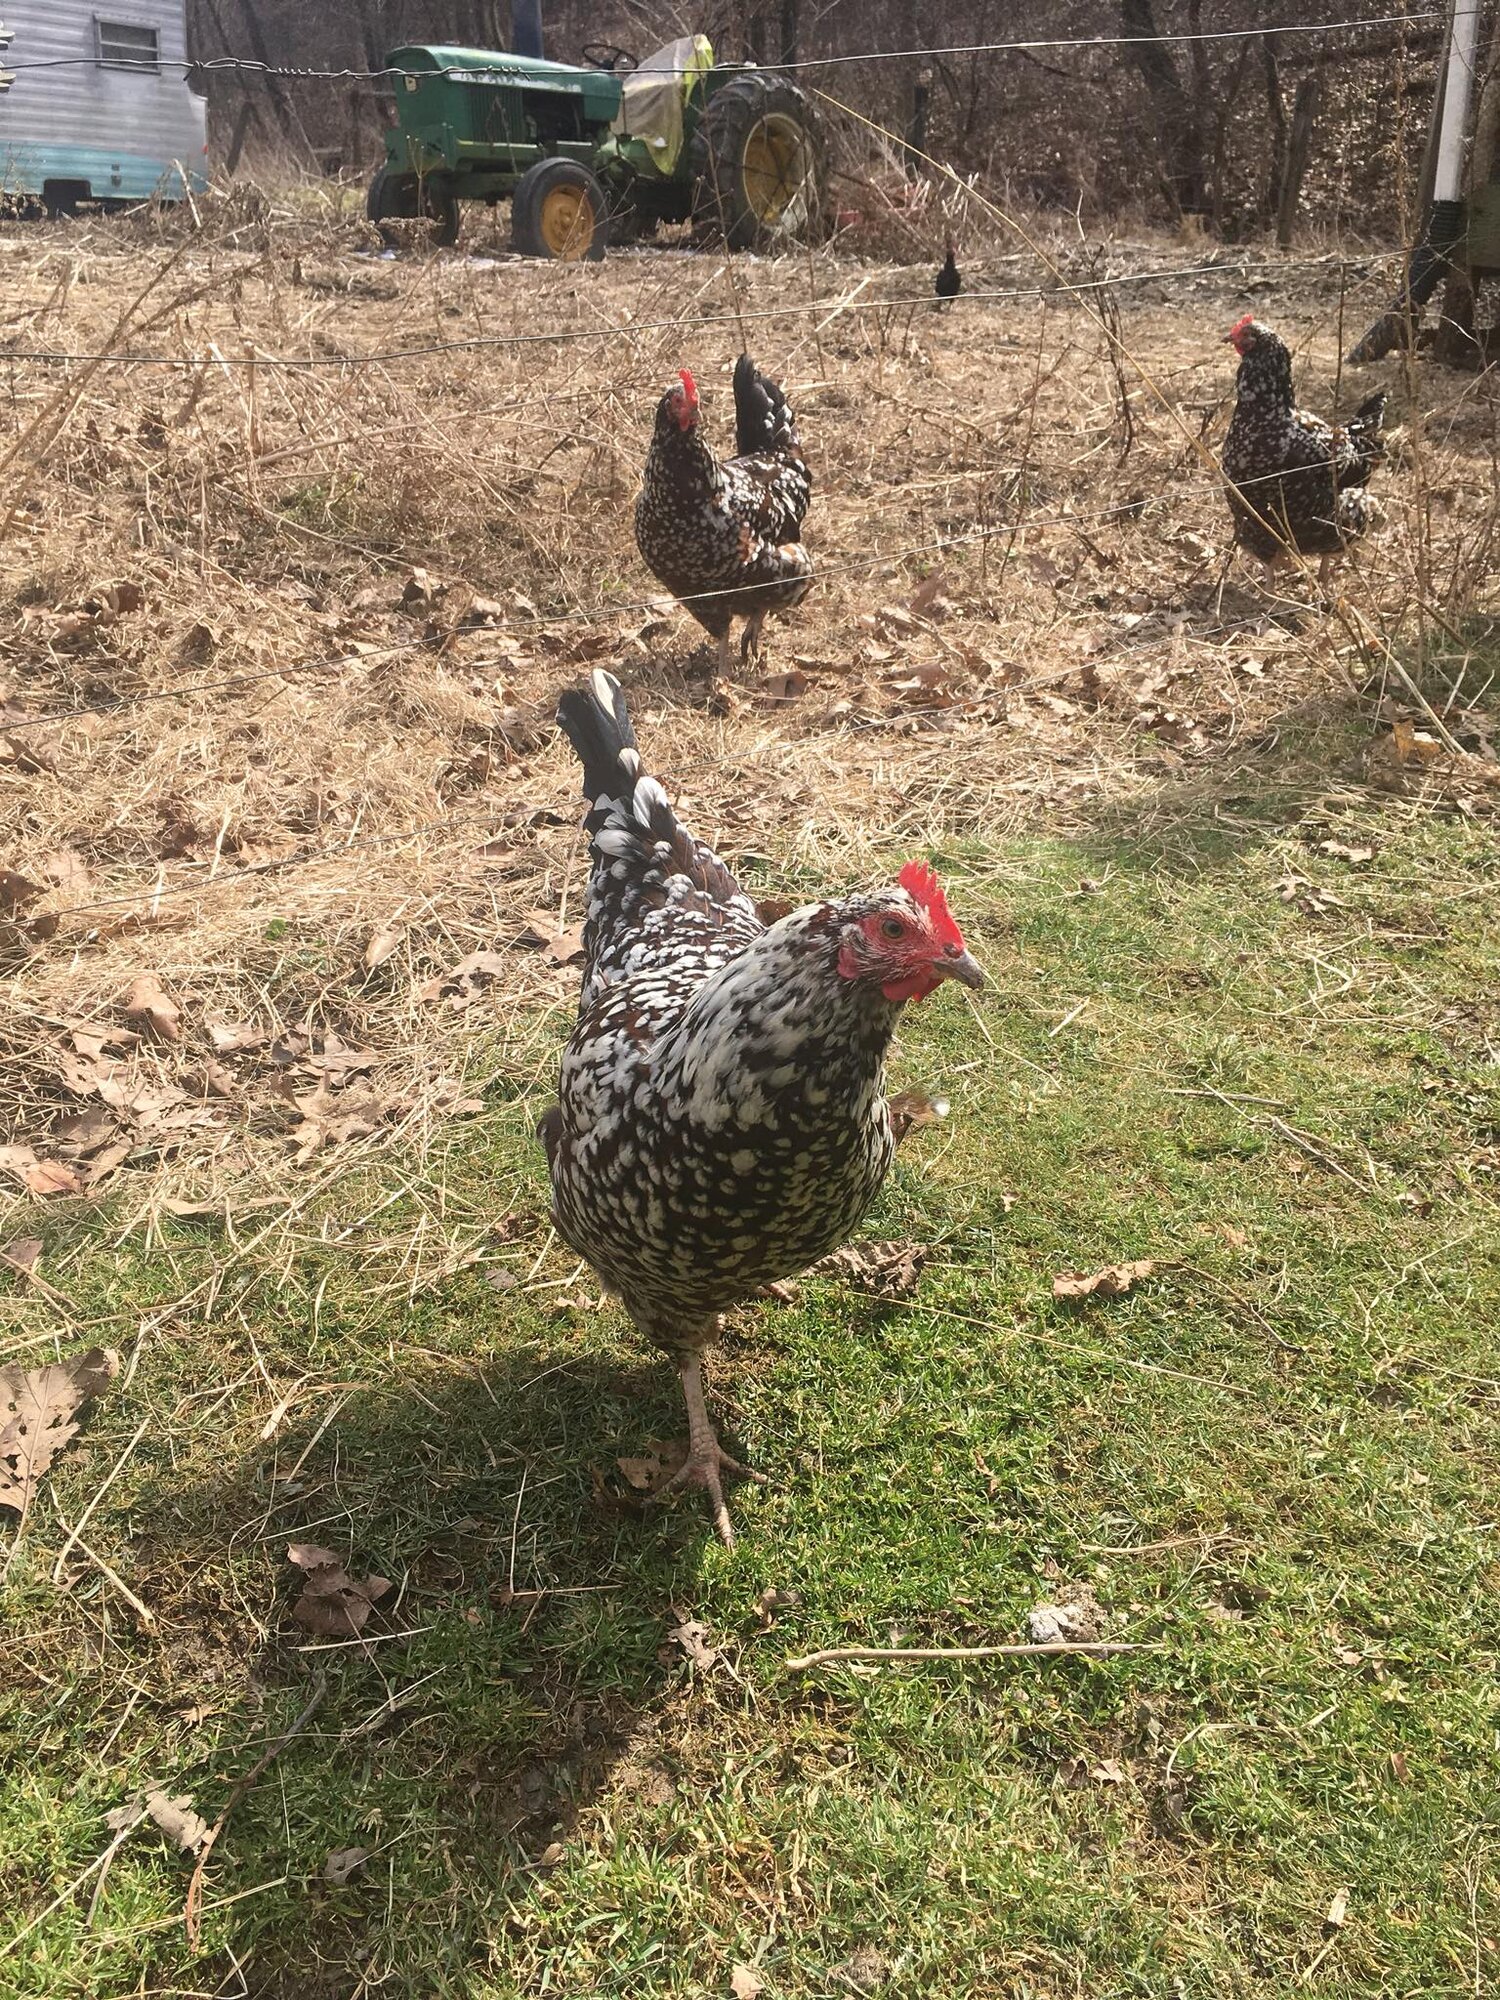 Speckled sussex hen